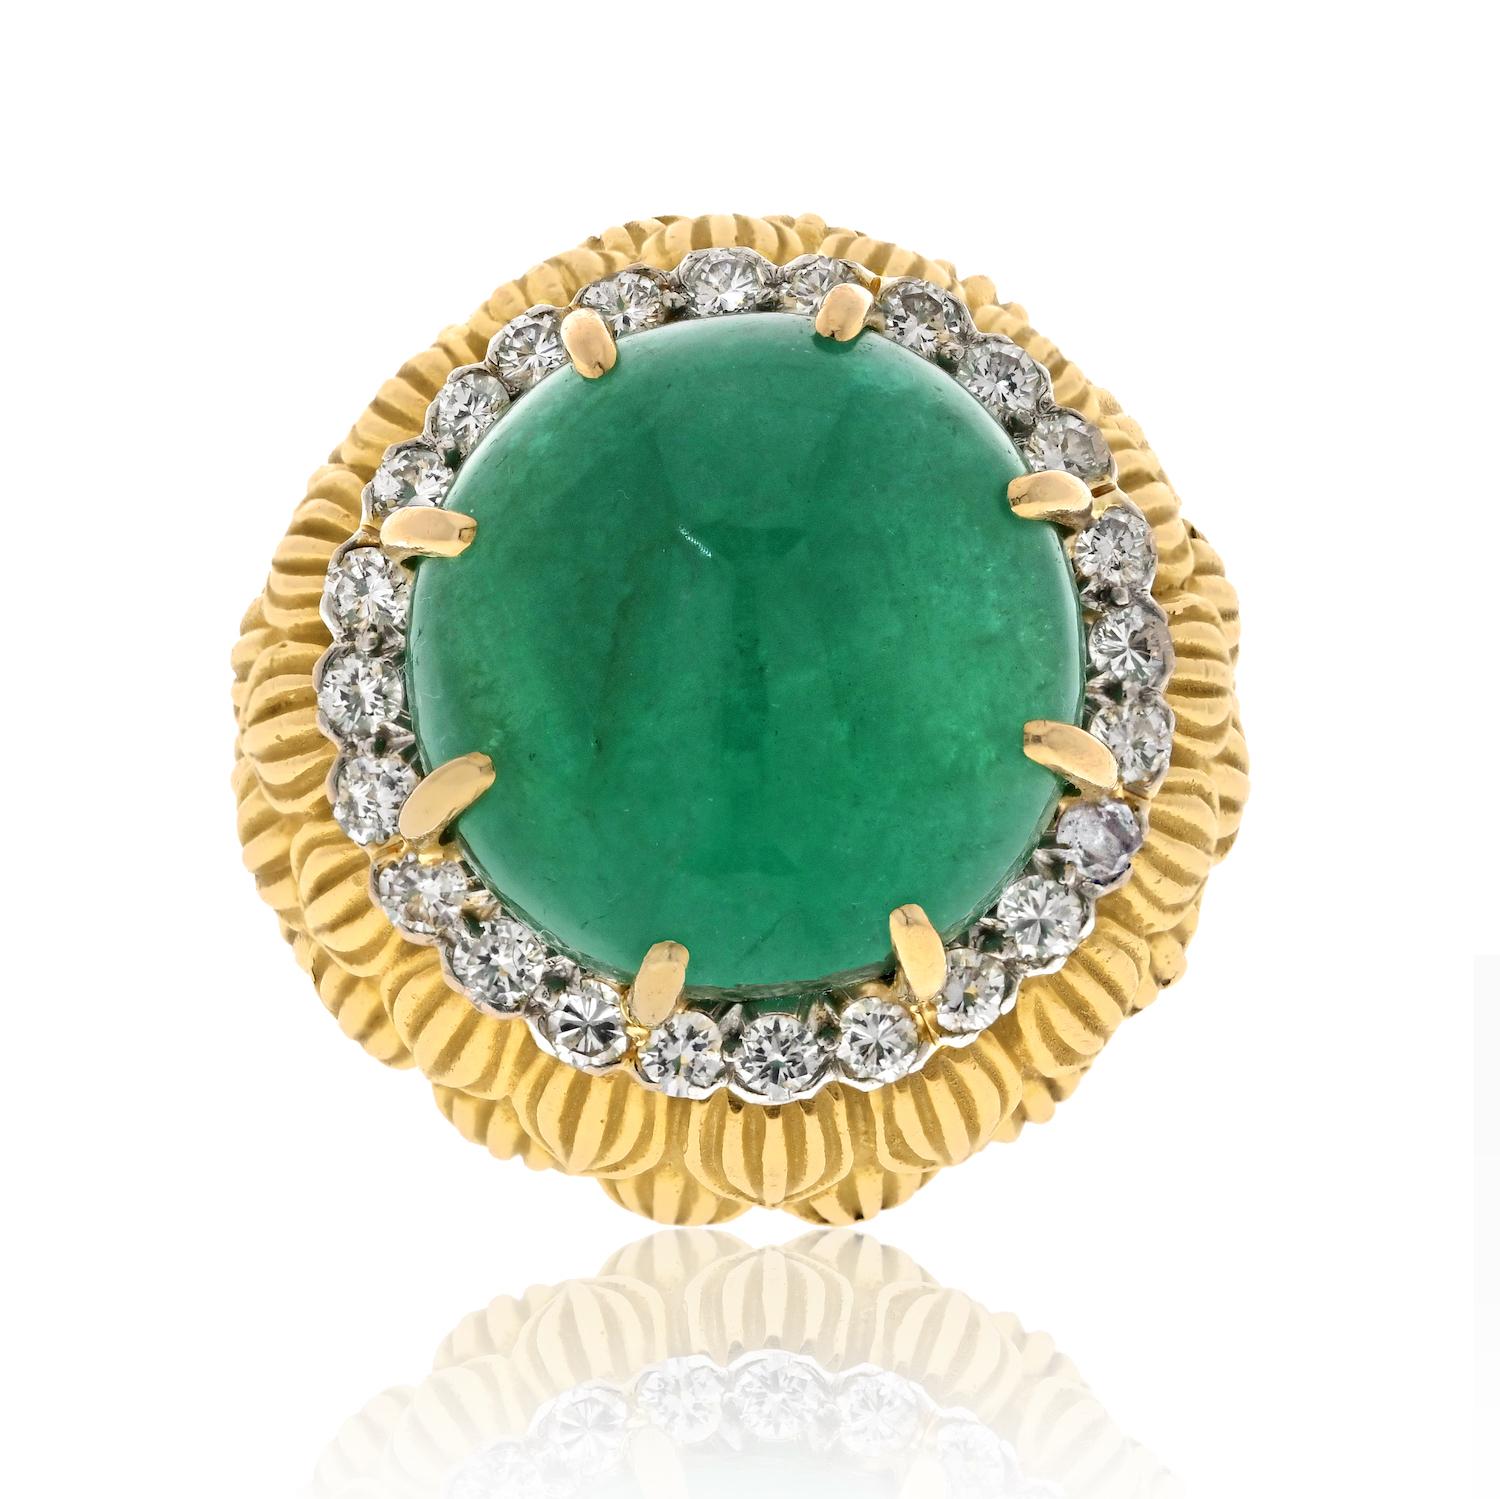 Elevate your jewelry collection with our David Webb Platinum & 18K Yellow Gold Cabochon Green Emerald And Diamond Textured Ring. 

This exceptional piece features a magnificent 24-carat cabochon green emerald at its center, radiating with vibrant